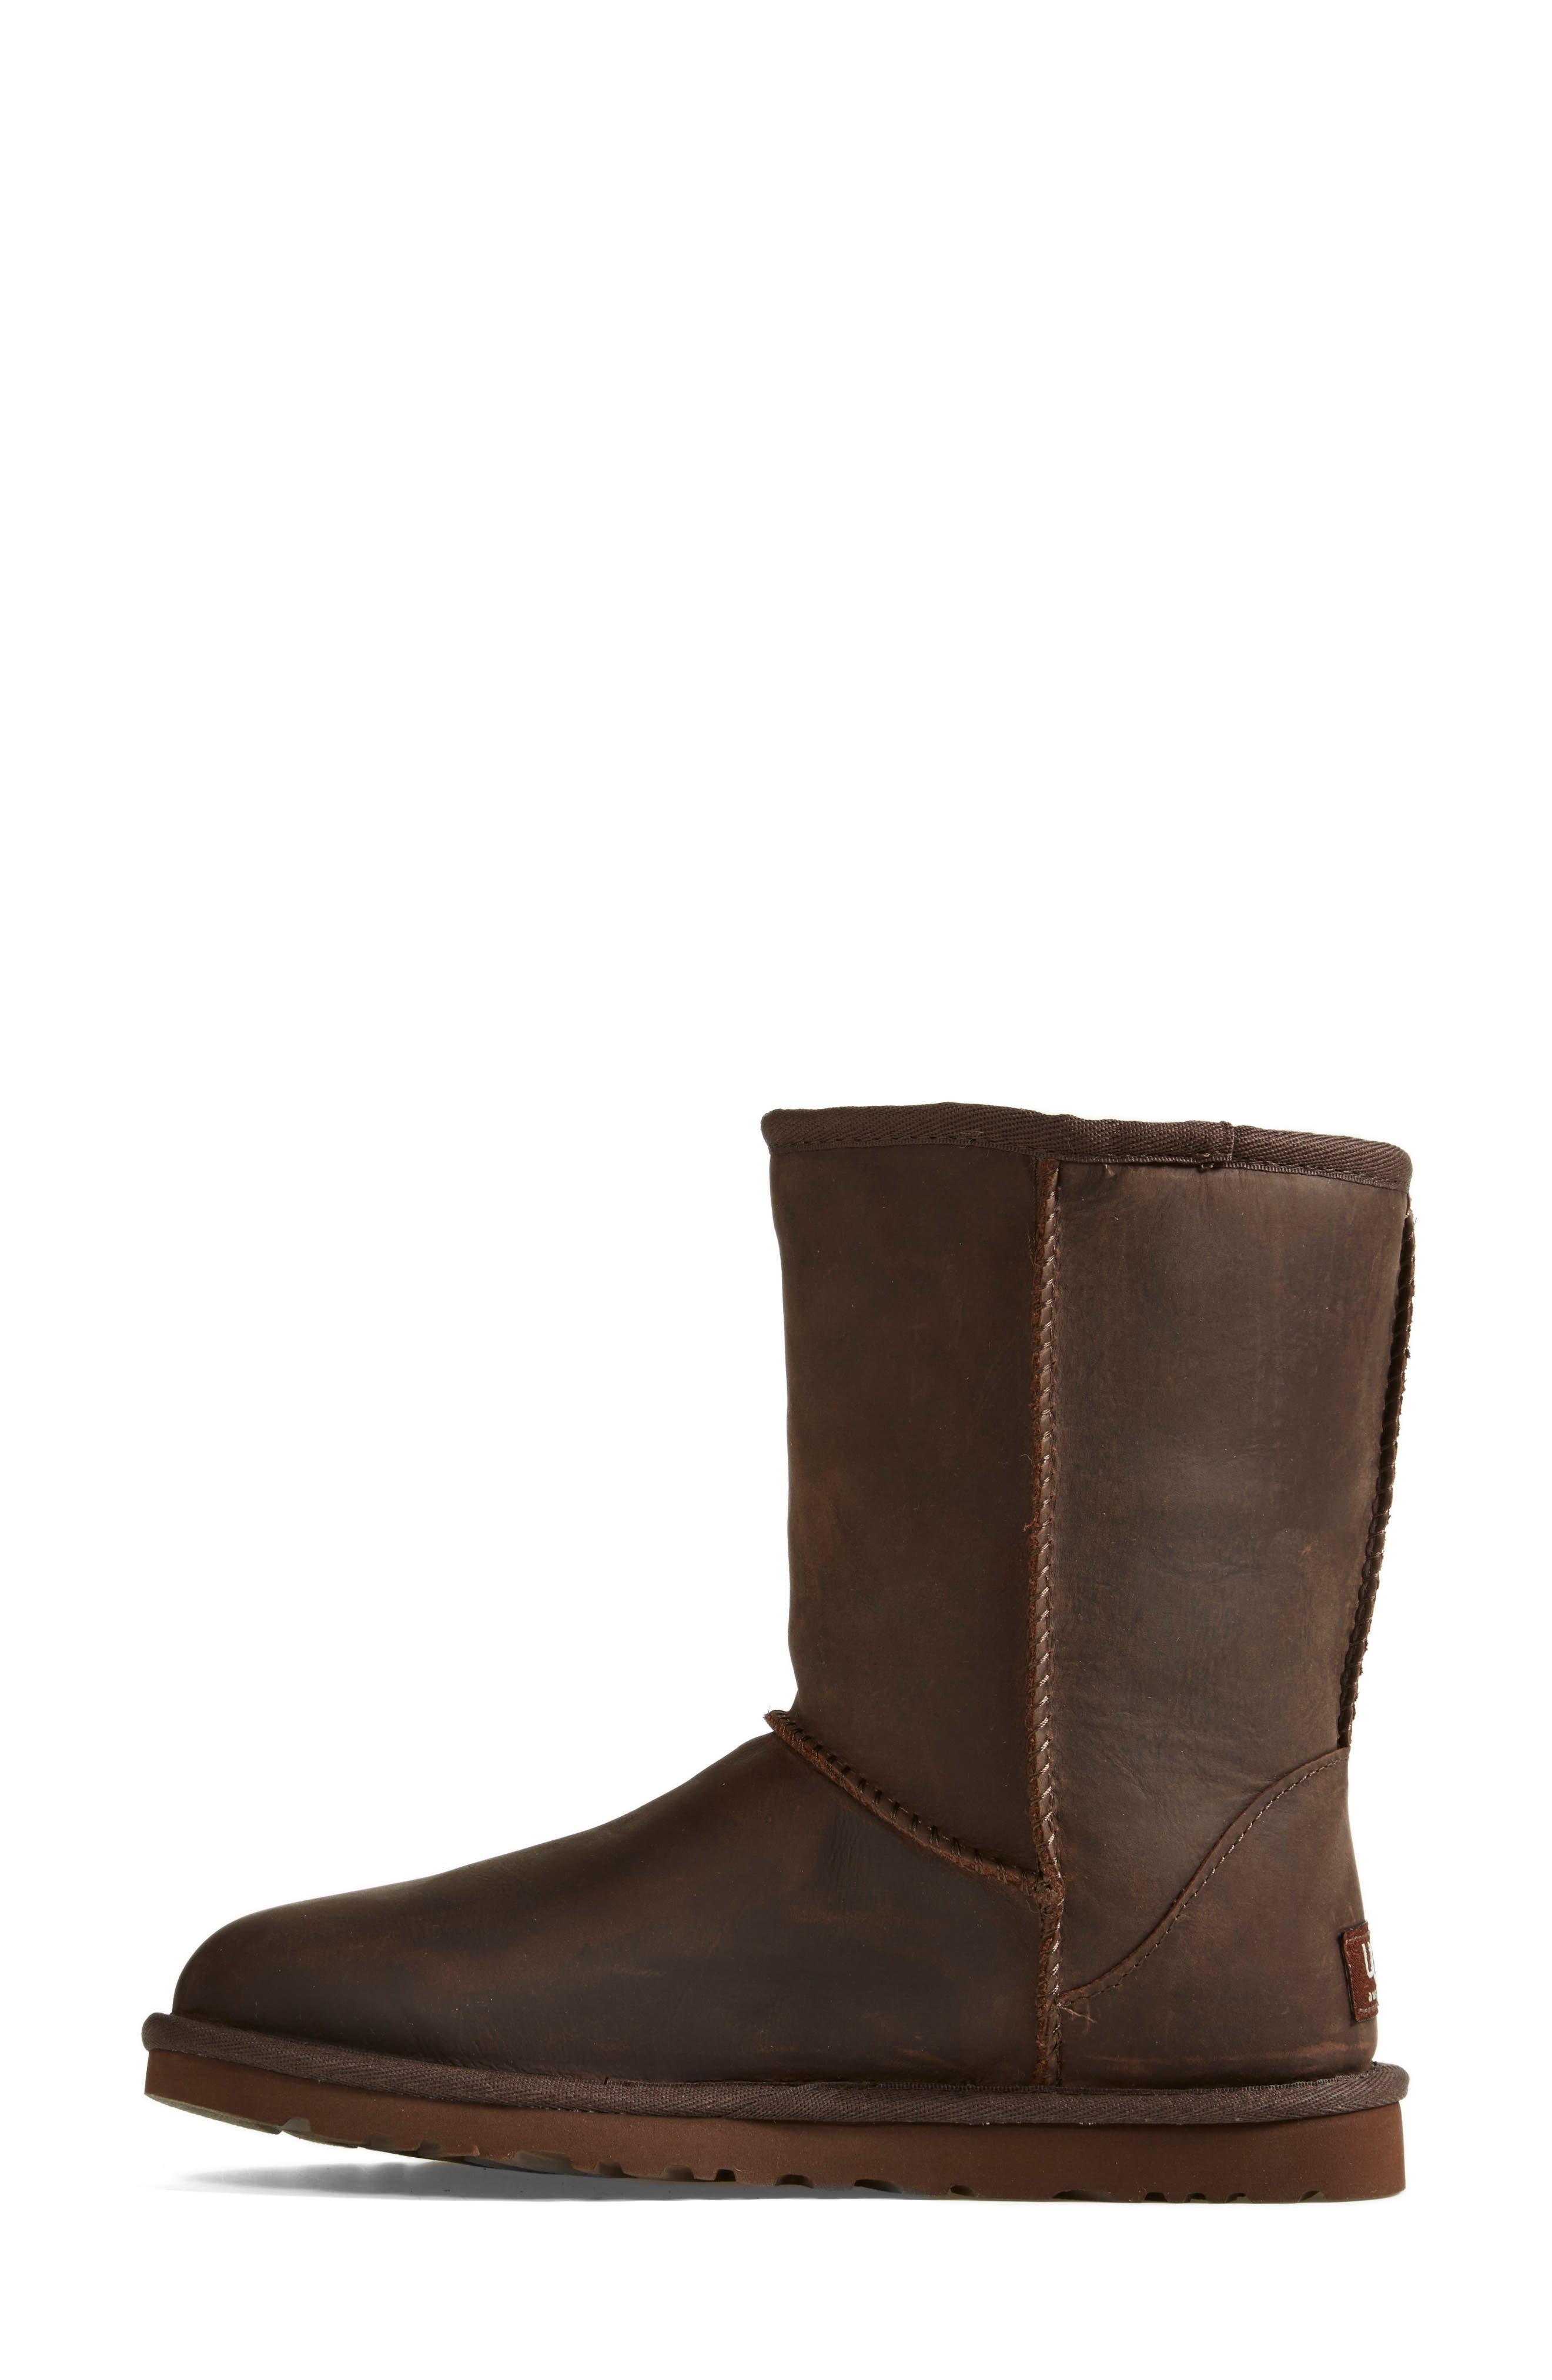 women's short leather ugg boots